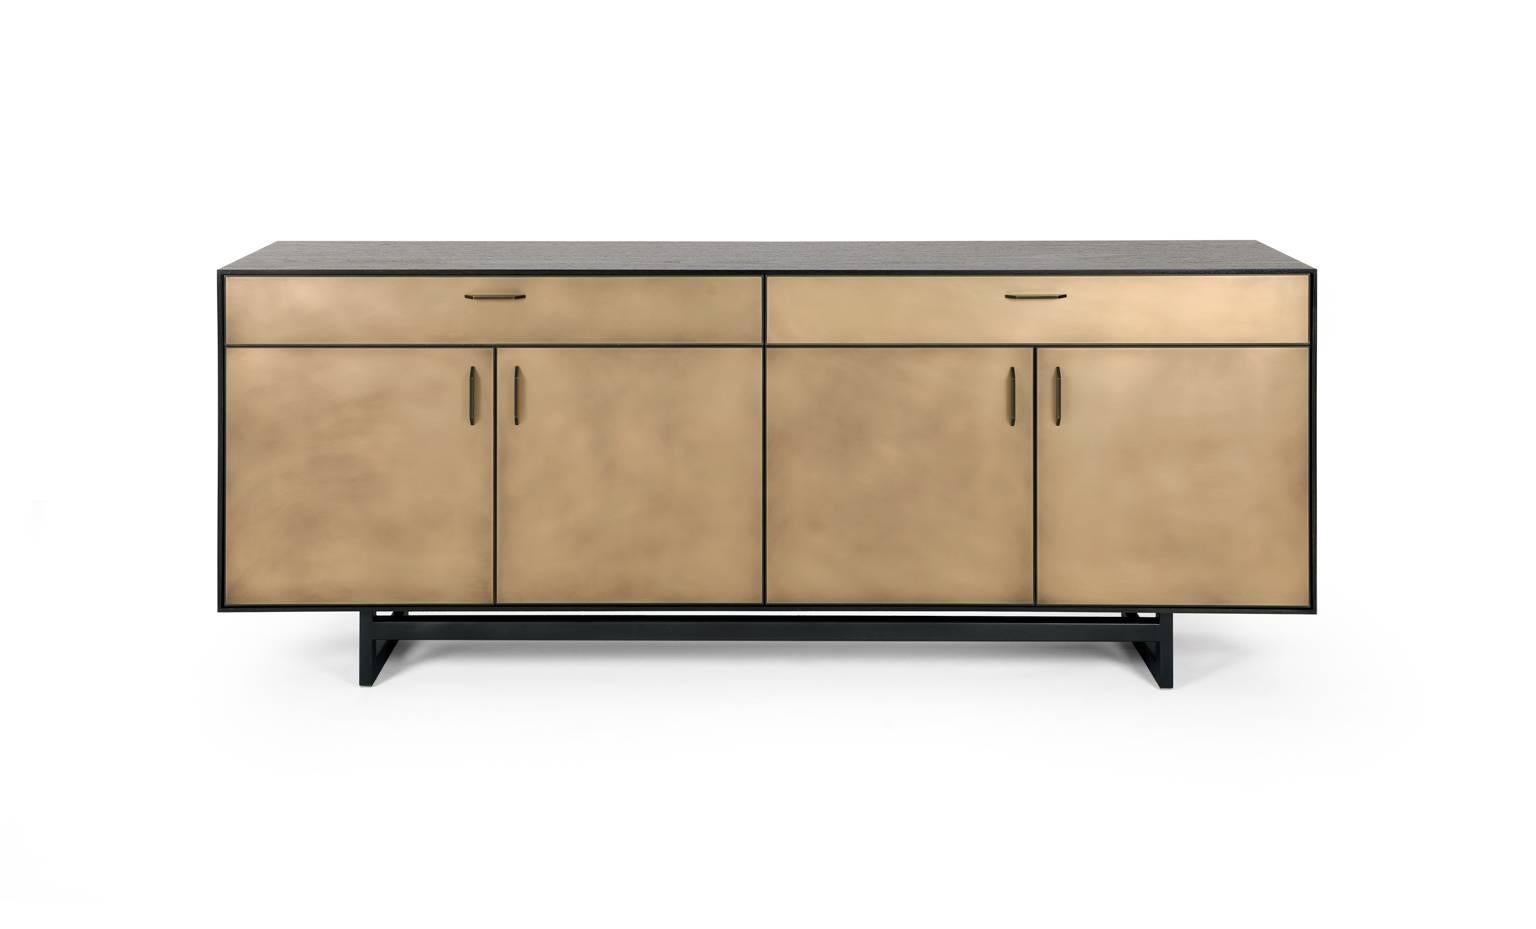 The Gotham credenza features clean lines that blend harmoniously with the beautiful mix of materials. A dark and dramatic oxidized walnut frame sits on a blackened steel base. Custom hand-sculpted blackened bronze pulls compliment the striking